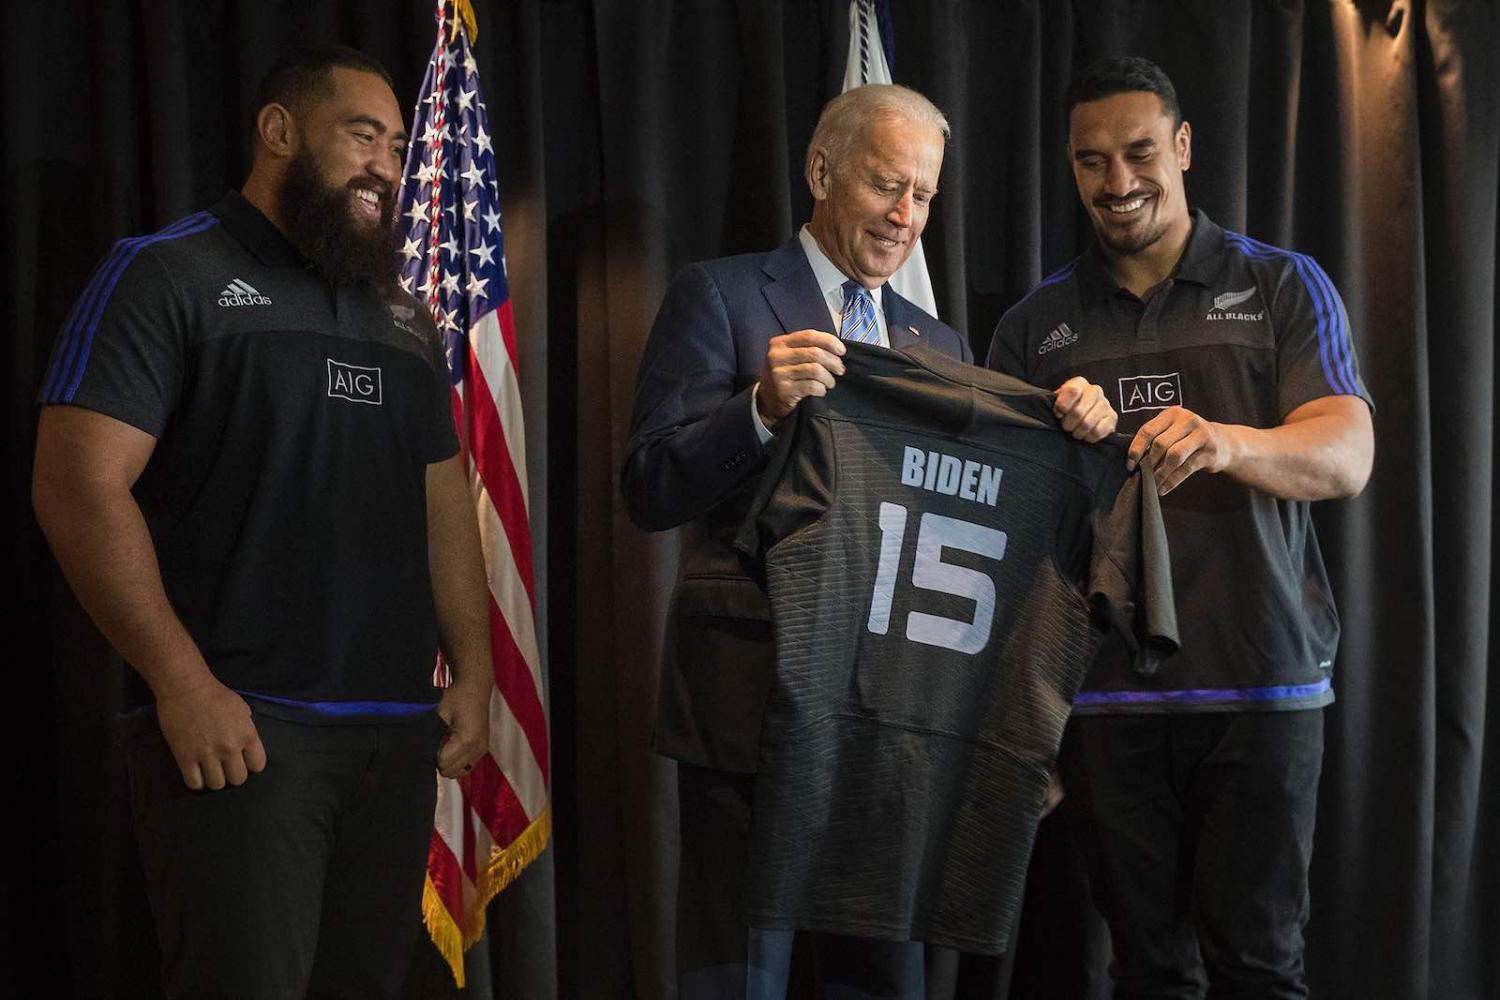 Joe Biden, as US Vice President in July 2016, is presented with an All Blacks jumper during a visit to New Zealand (Chris McKeen/AFP via Getty Images)